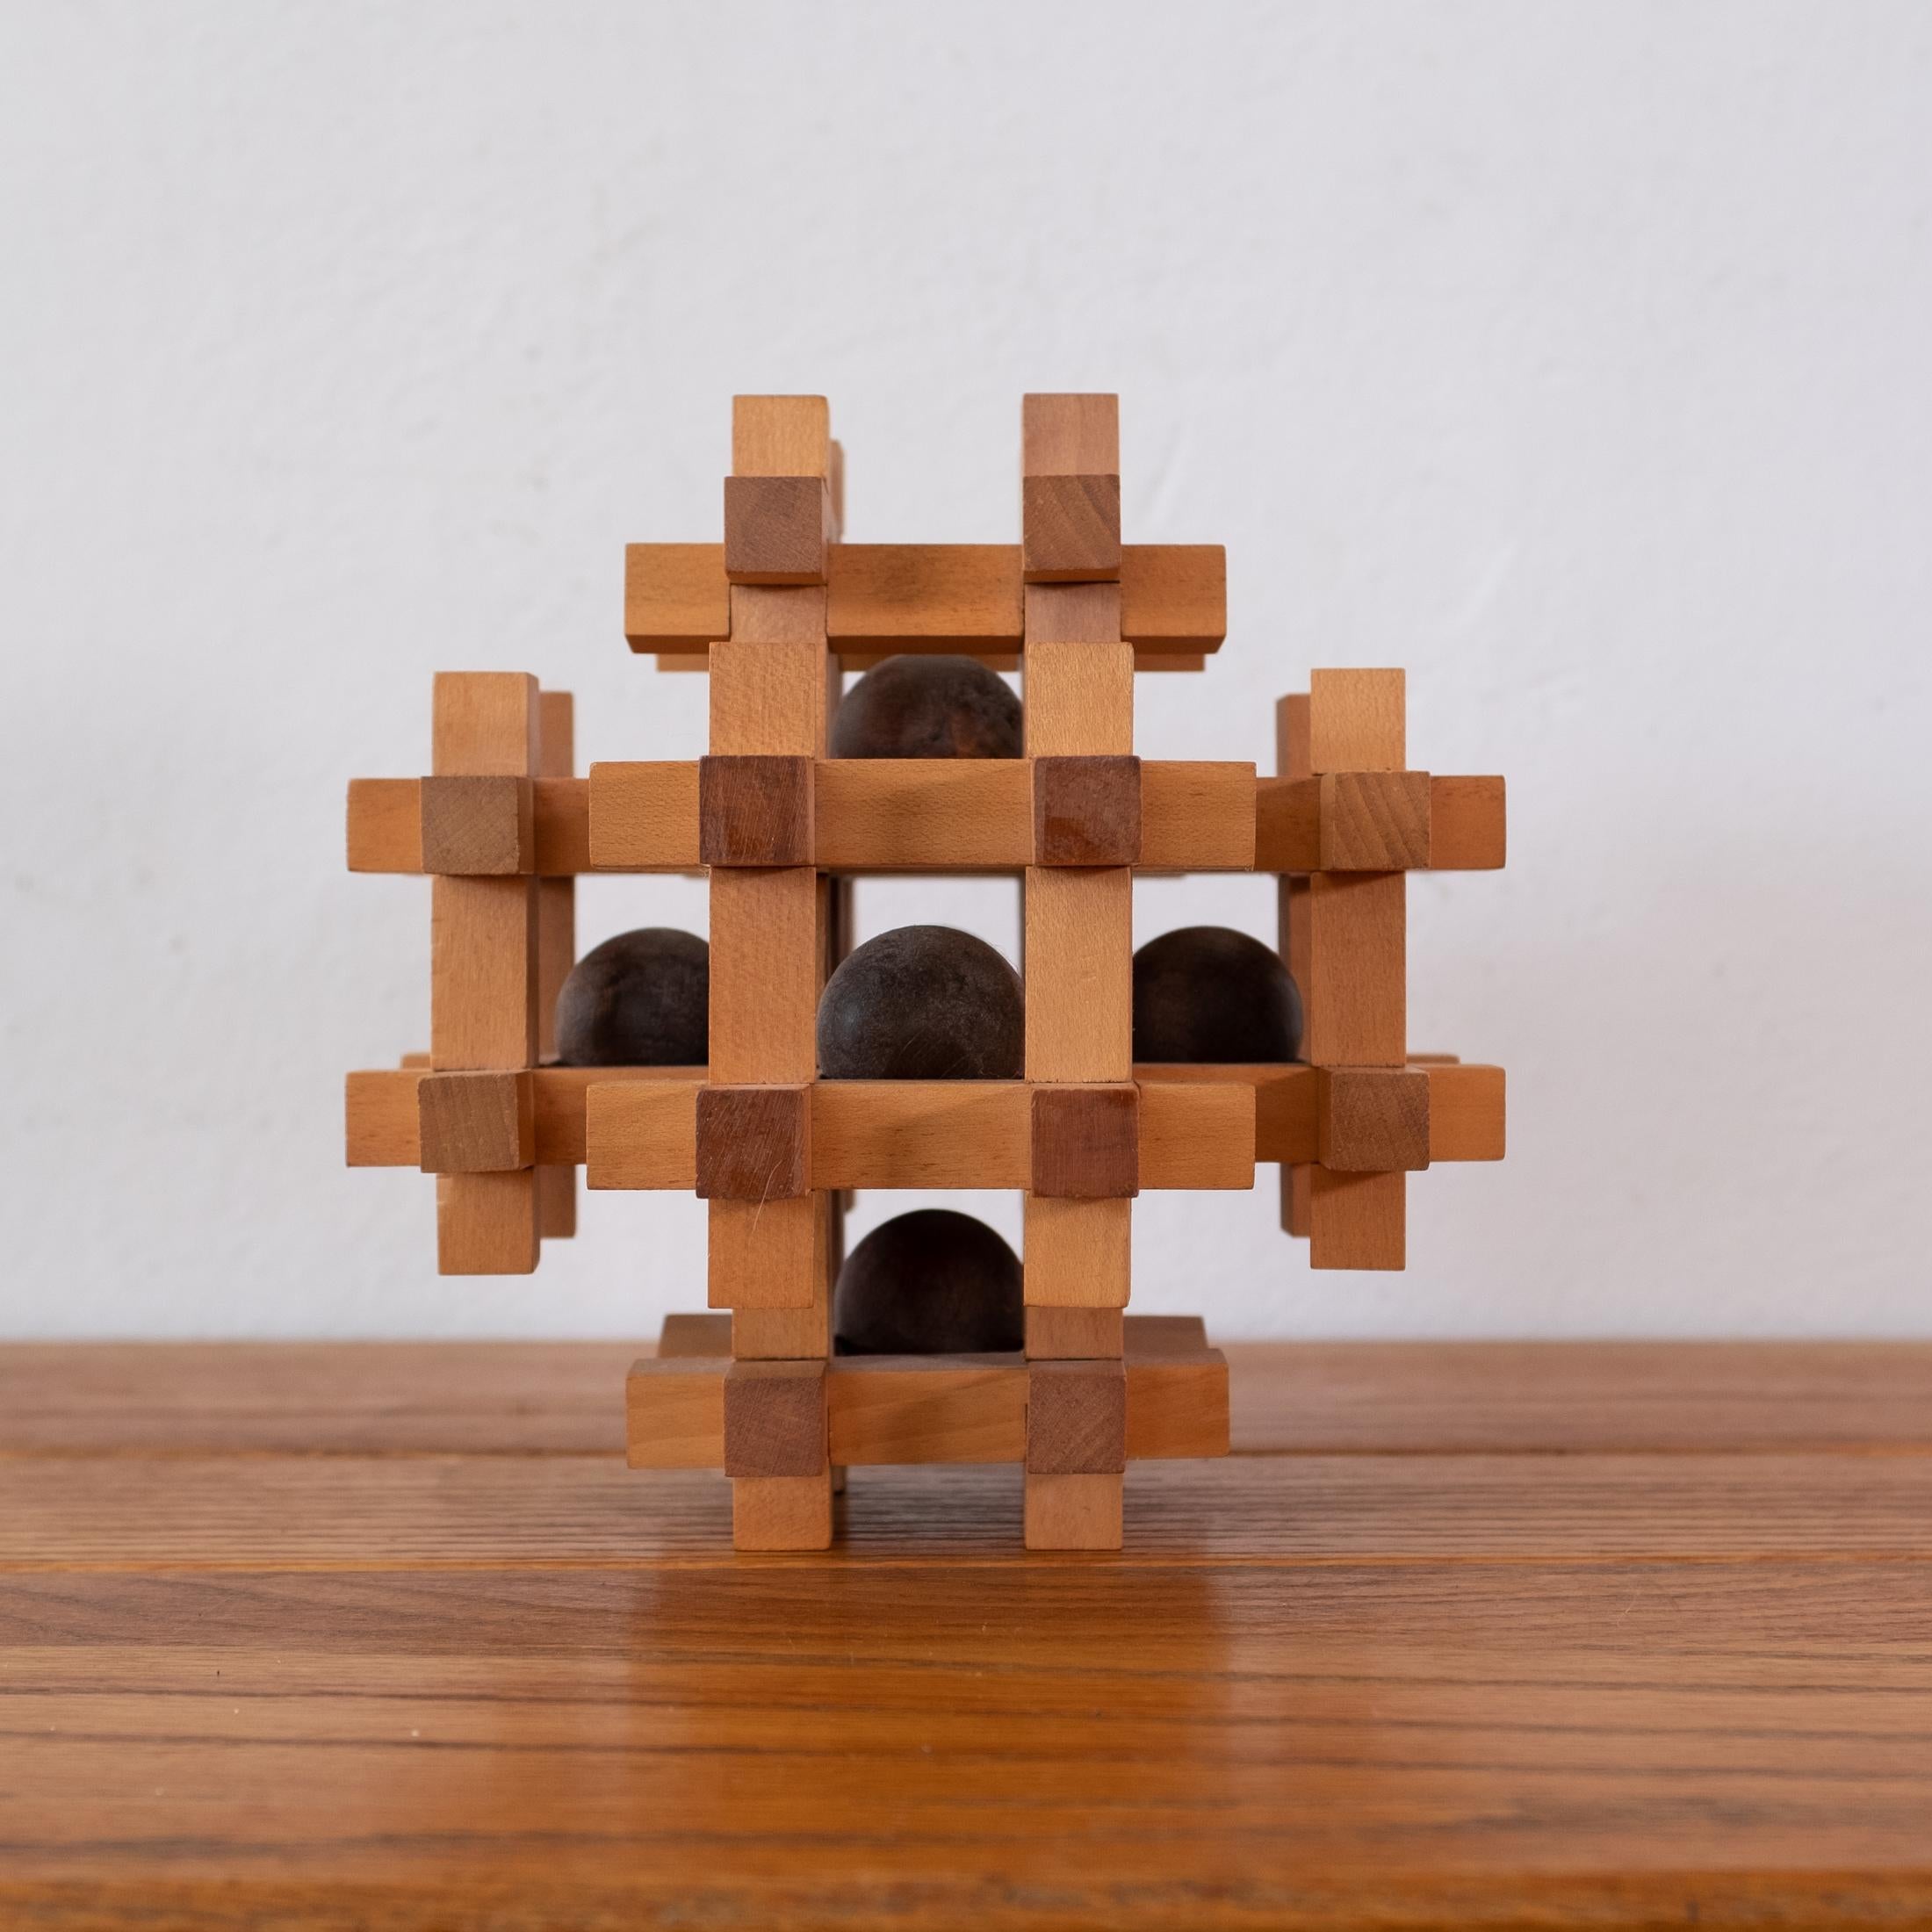 Wood puzzle sculpture by Sori Yanagi for Kumiki. Yanagi designed just a few puzzles for the company. Japan, 1960s

Sori was the son of the Japanese Folk Crafts Museum founder, Soetsu Yanagi. Having studied both art and architecture, he pioneered